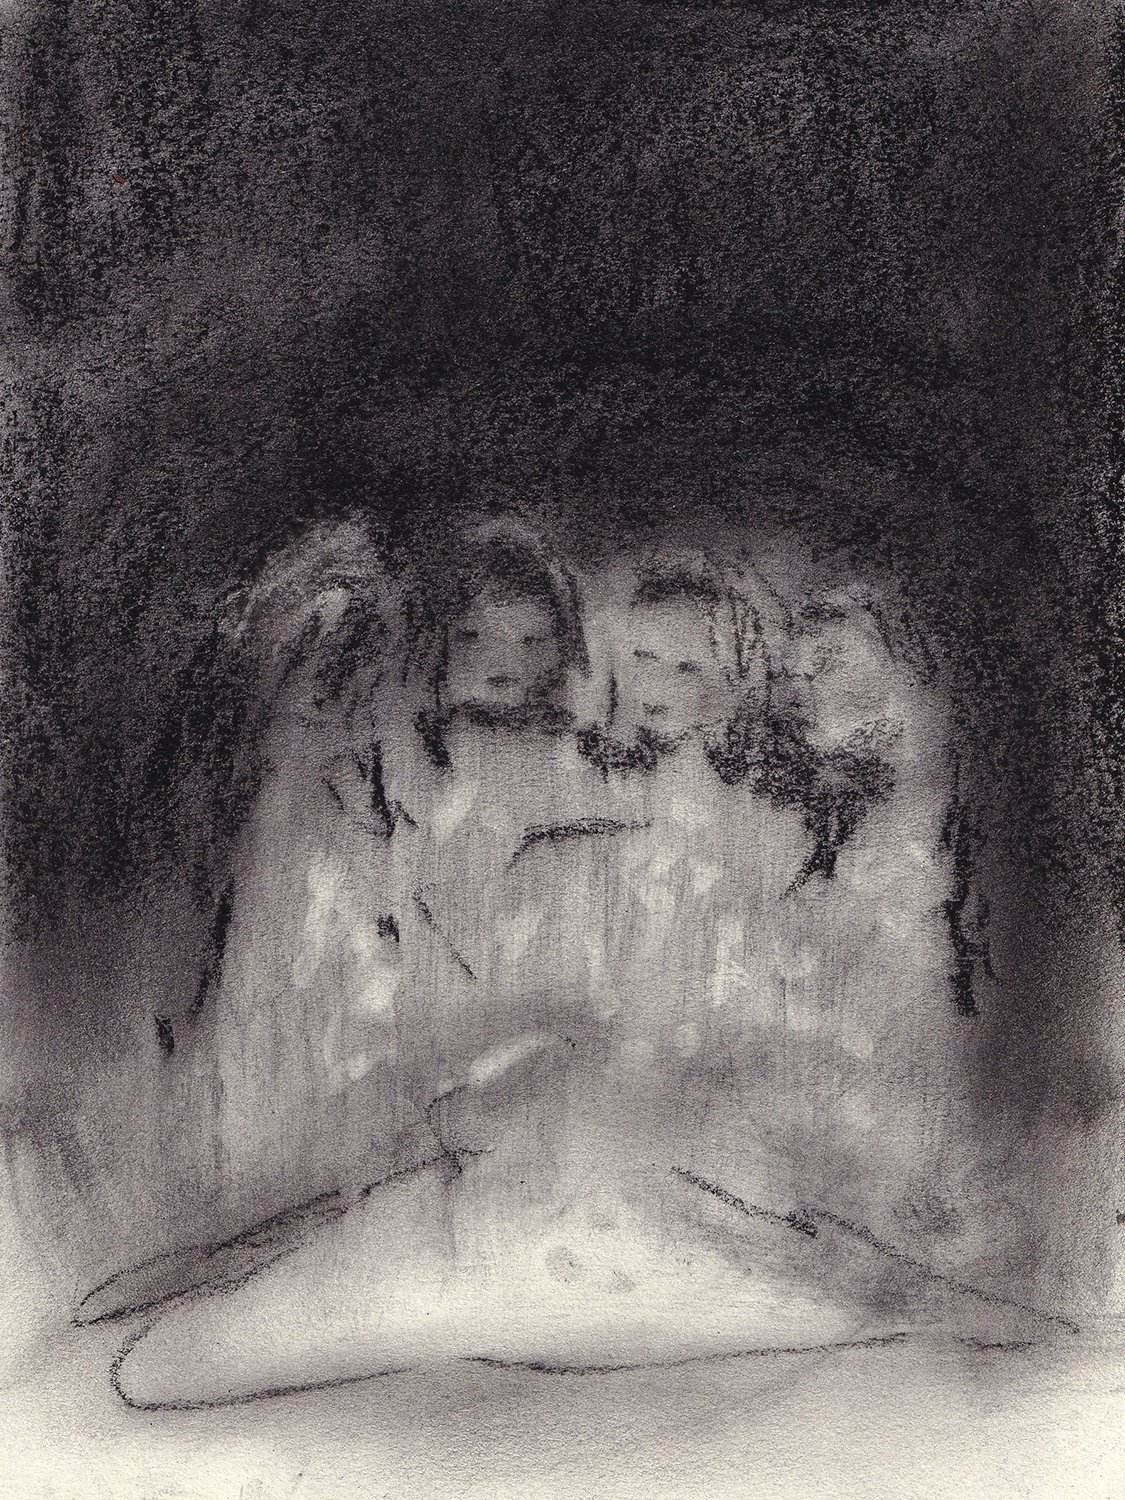 Four / 2022, charcoal on paper, 15 x 20 cm